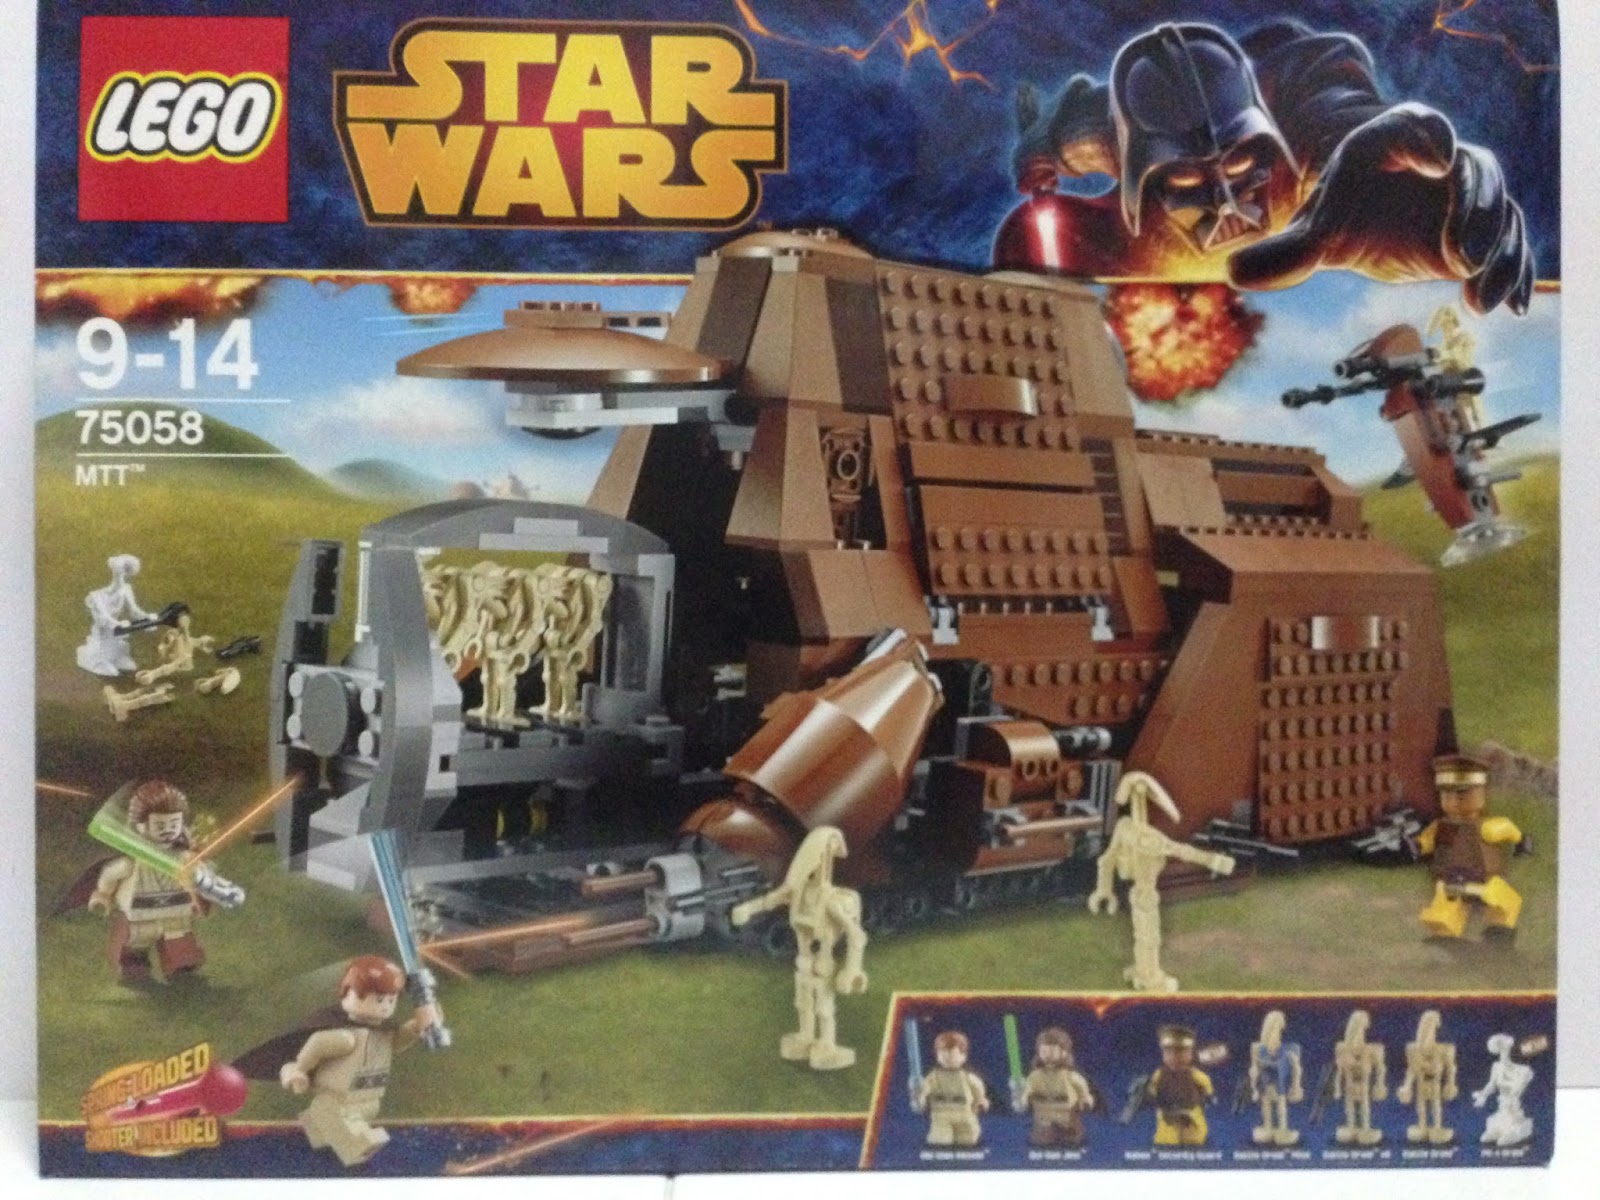 The of LEGO and Star Wars: 75058 MTT